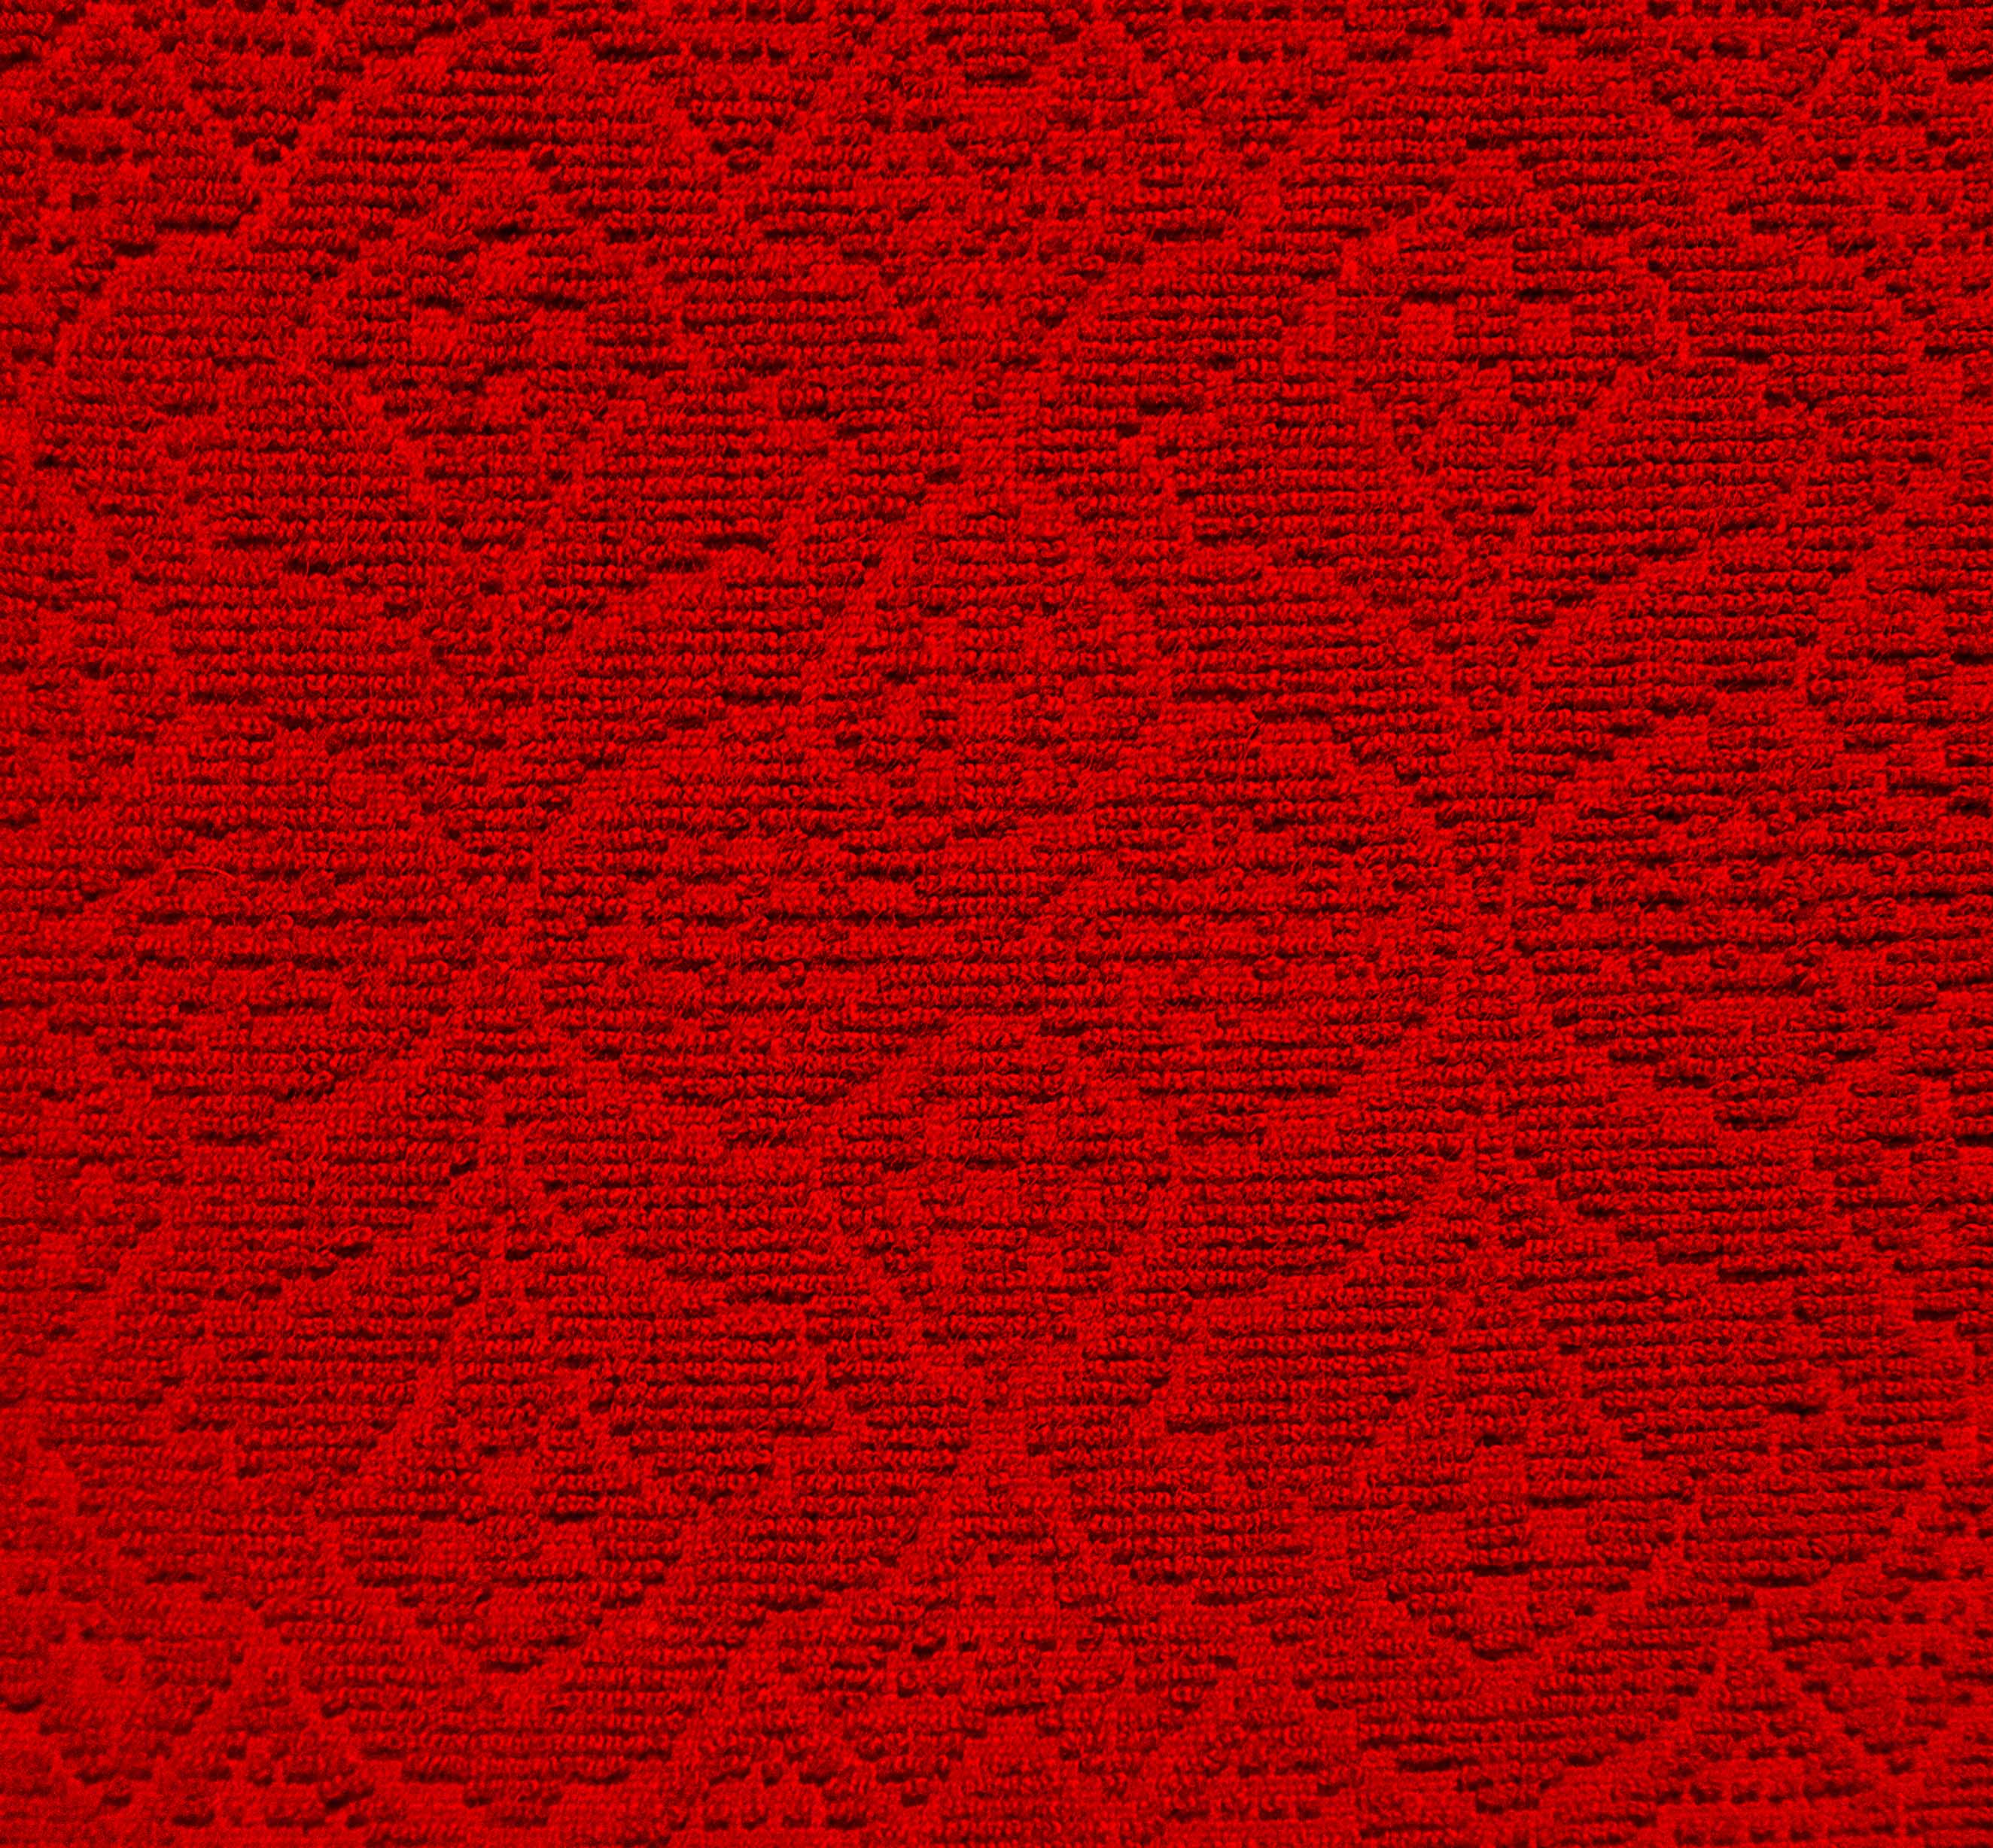 red fabric pattern download free textures